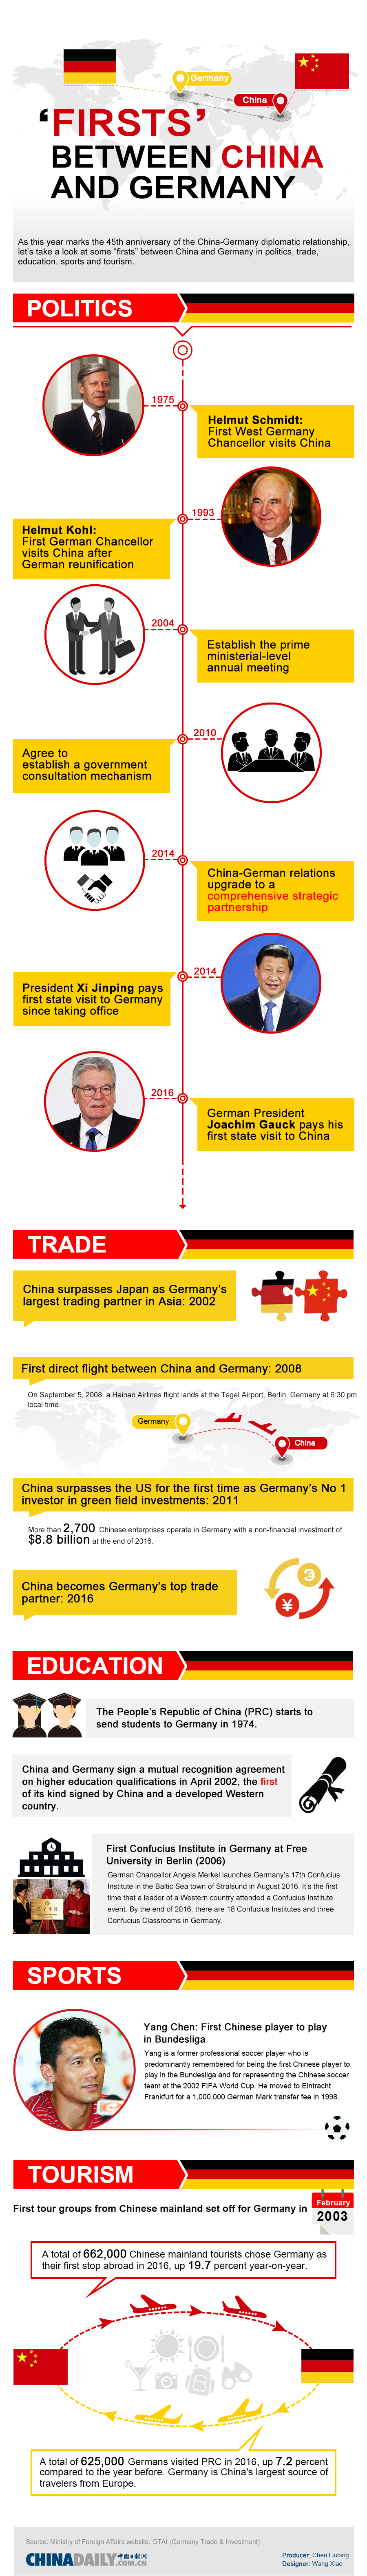 'Firsts' between China and Germany